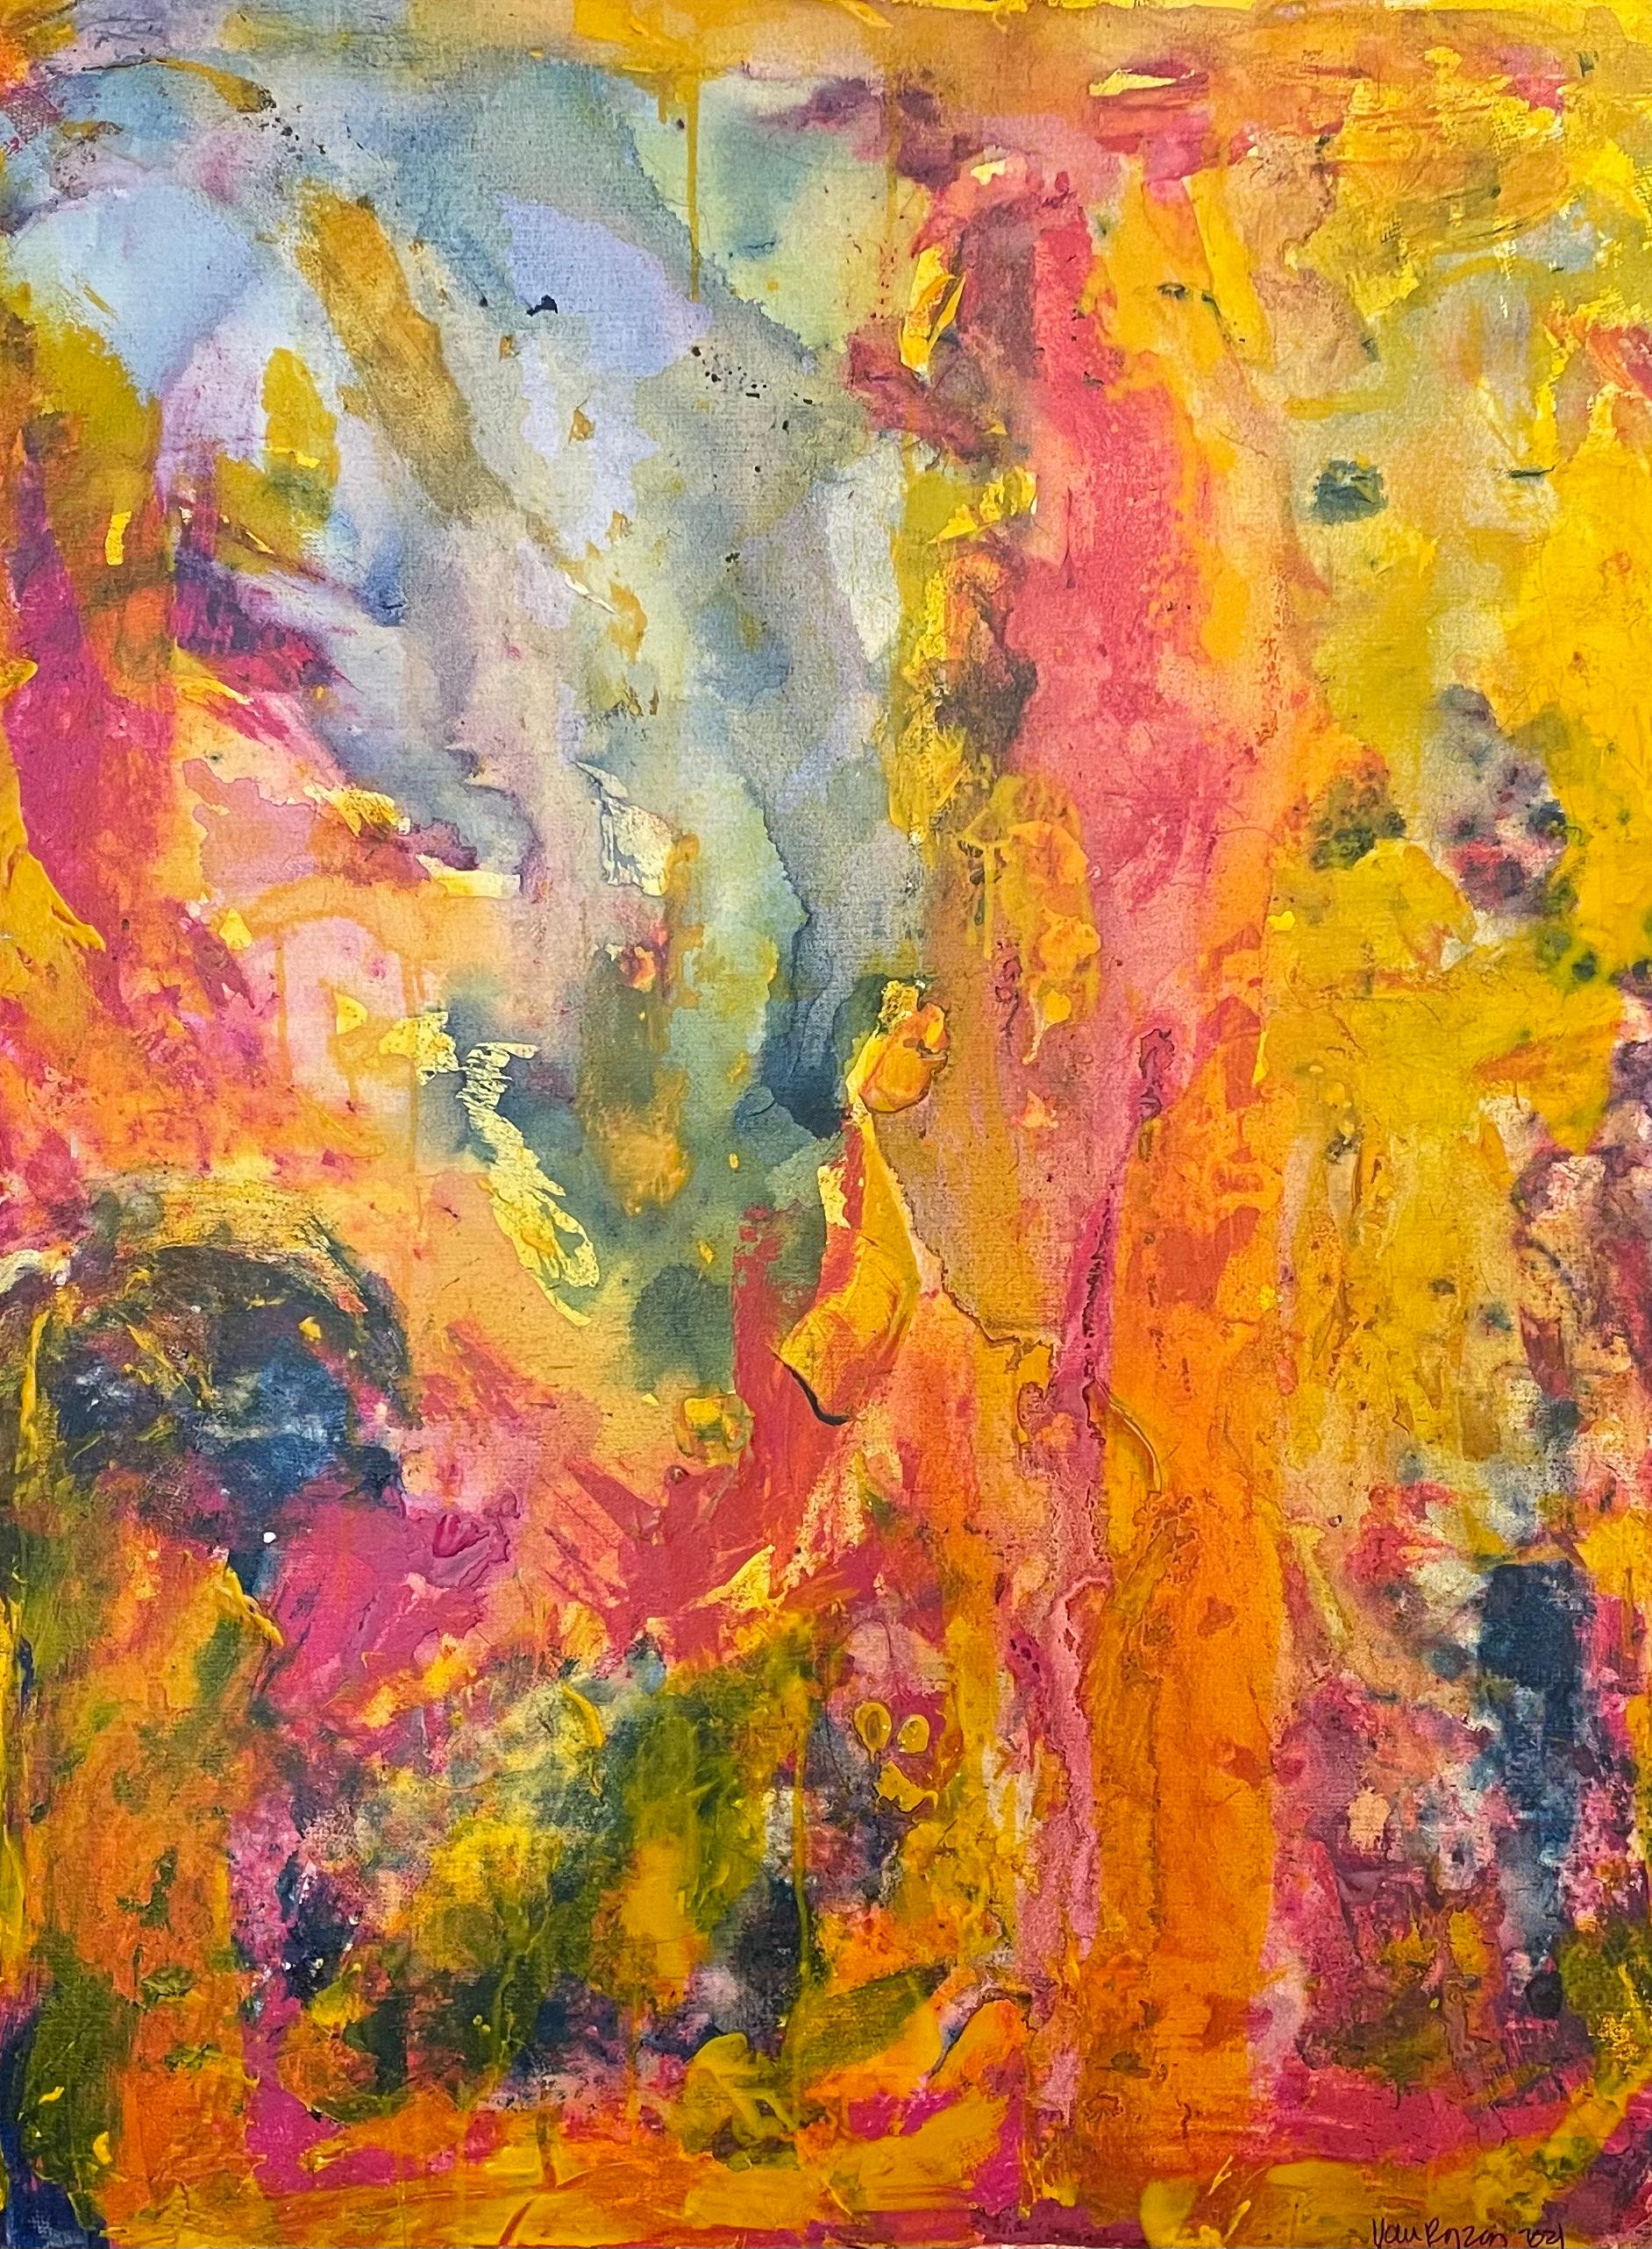 Introducing the Aura Collection by Nan Van Ryzin, where ethereal beauty and color converge. "Ethereal Aura," a 40"x30" abstract acrylic mixed media masterpiece, is the first piece in this captivating series. It draws you into a transcendent dance of